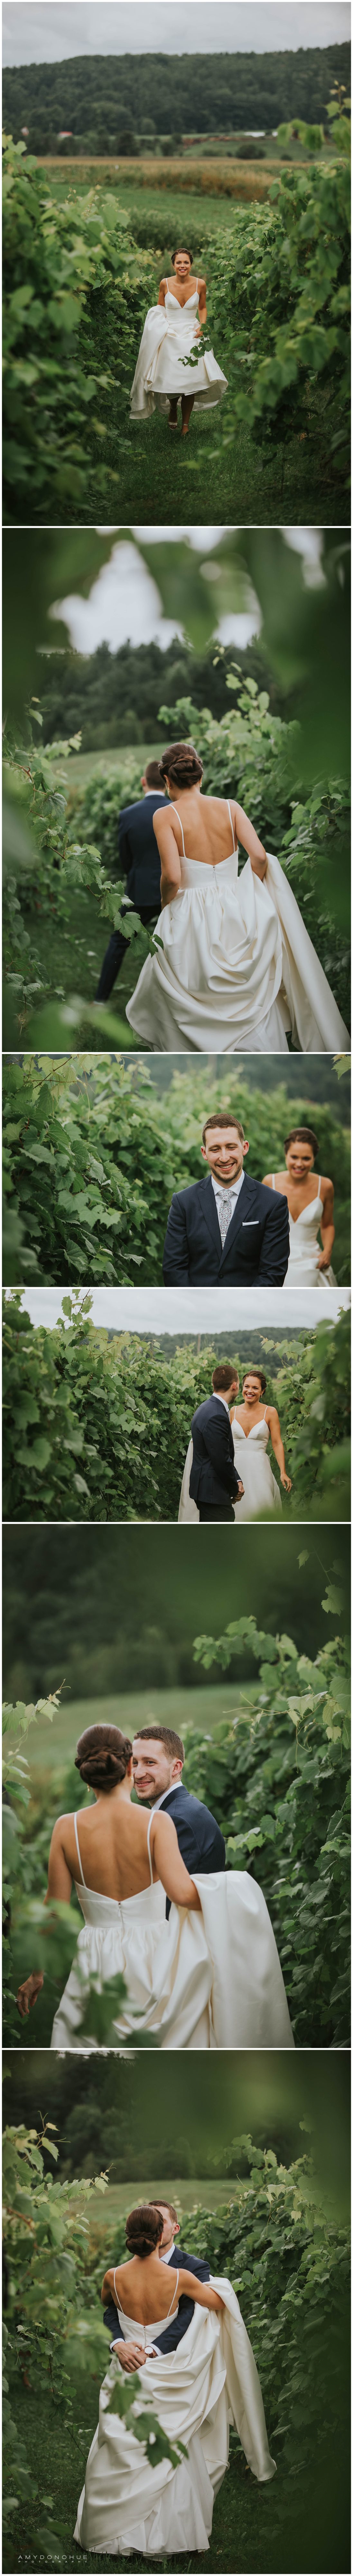 Bride and Groom First Look | The Barn at Boyden Farms | Vermont Wedding Photographer | © Amy Donohue Photography